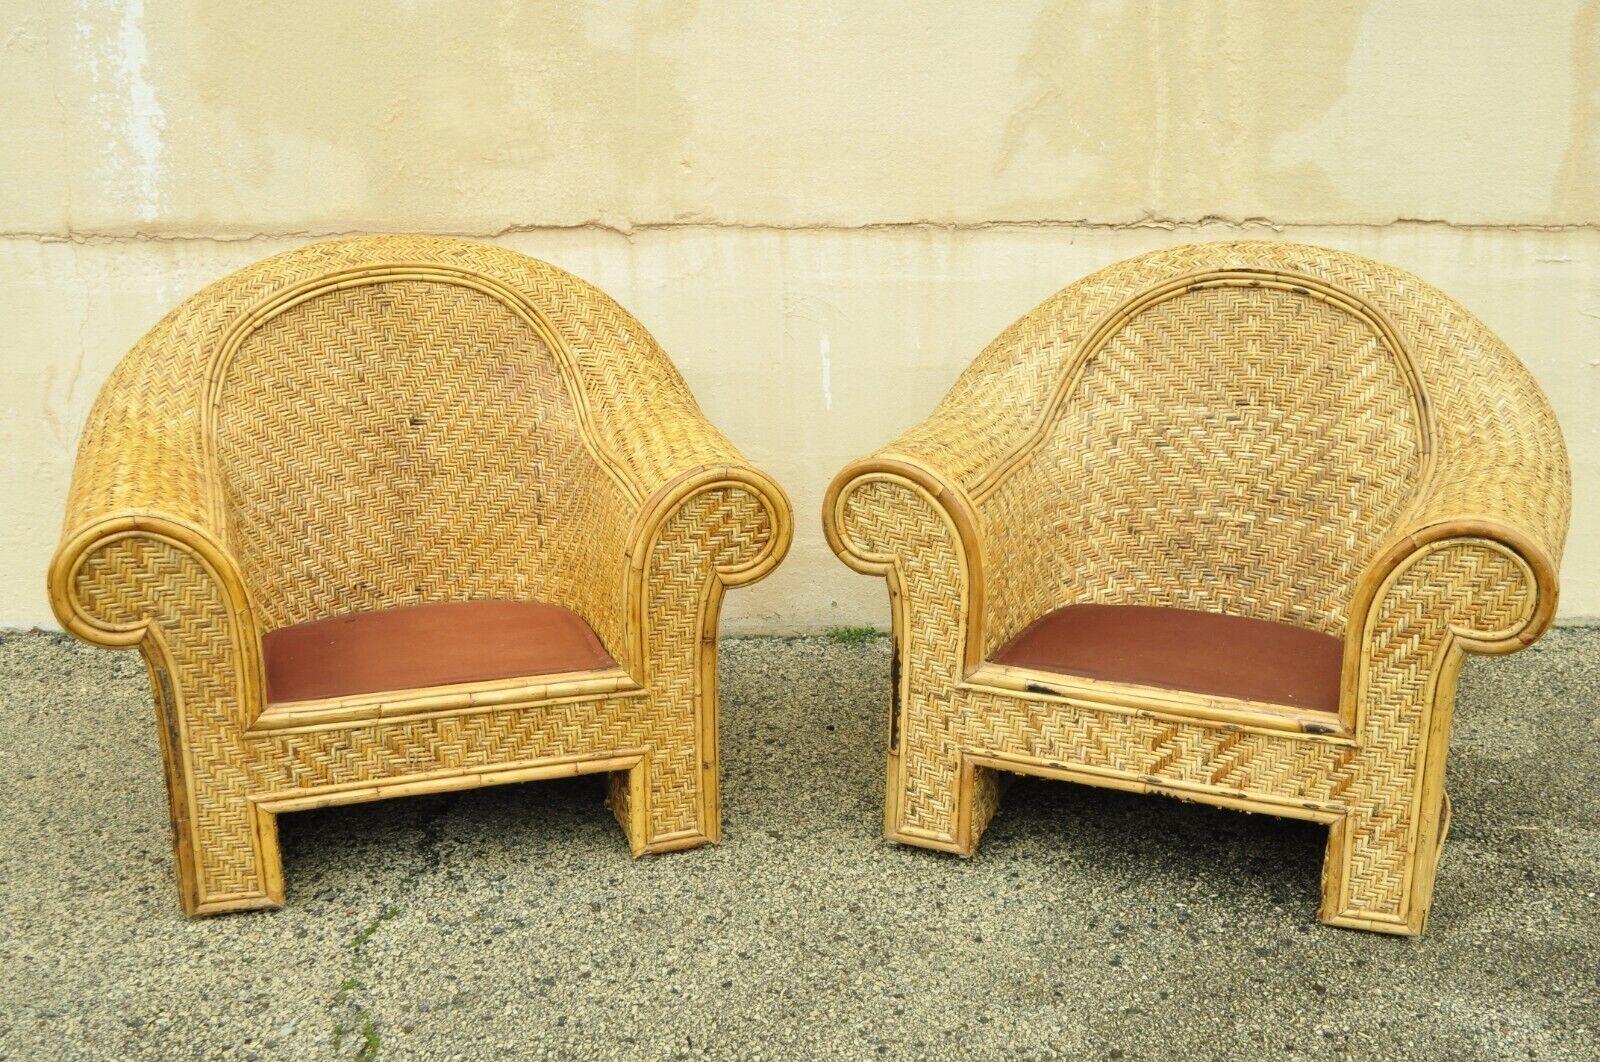 Ralph Lauren Attr. Large Woven Wicker Rattan Club Lounge Chairs - a Pair For Sale 5